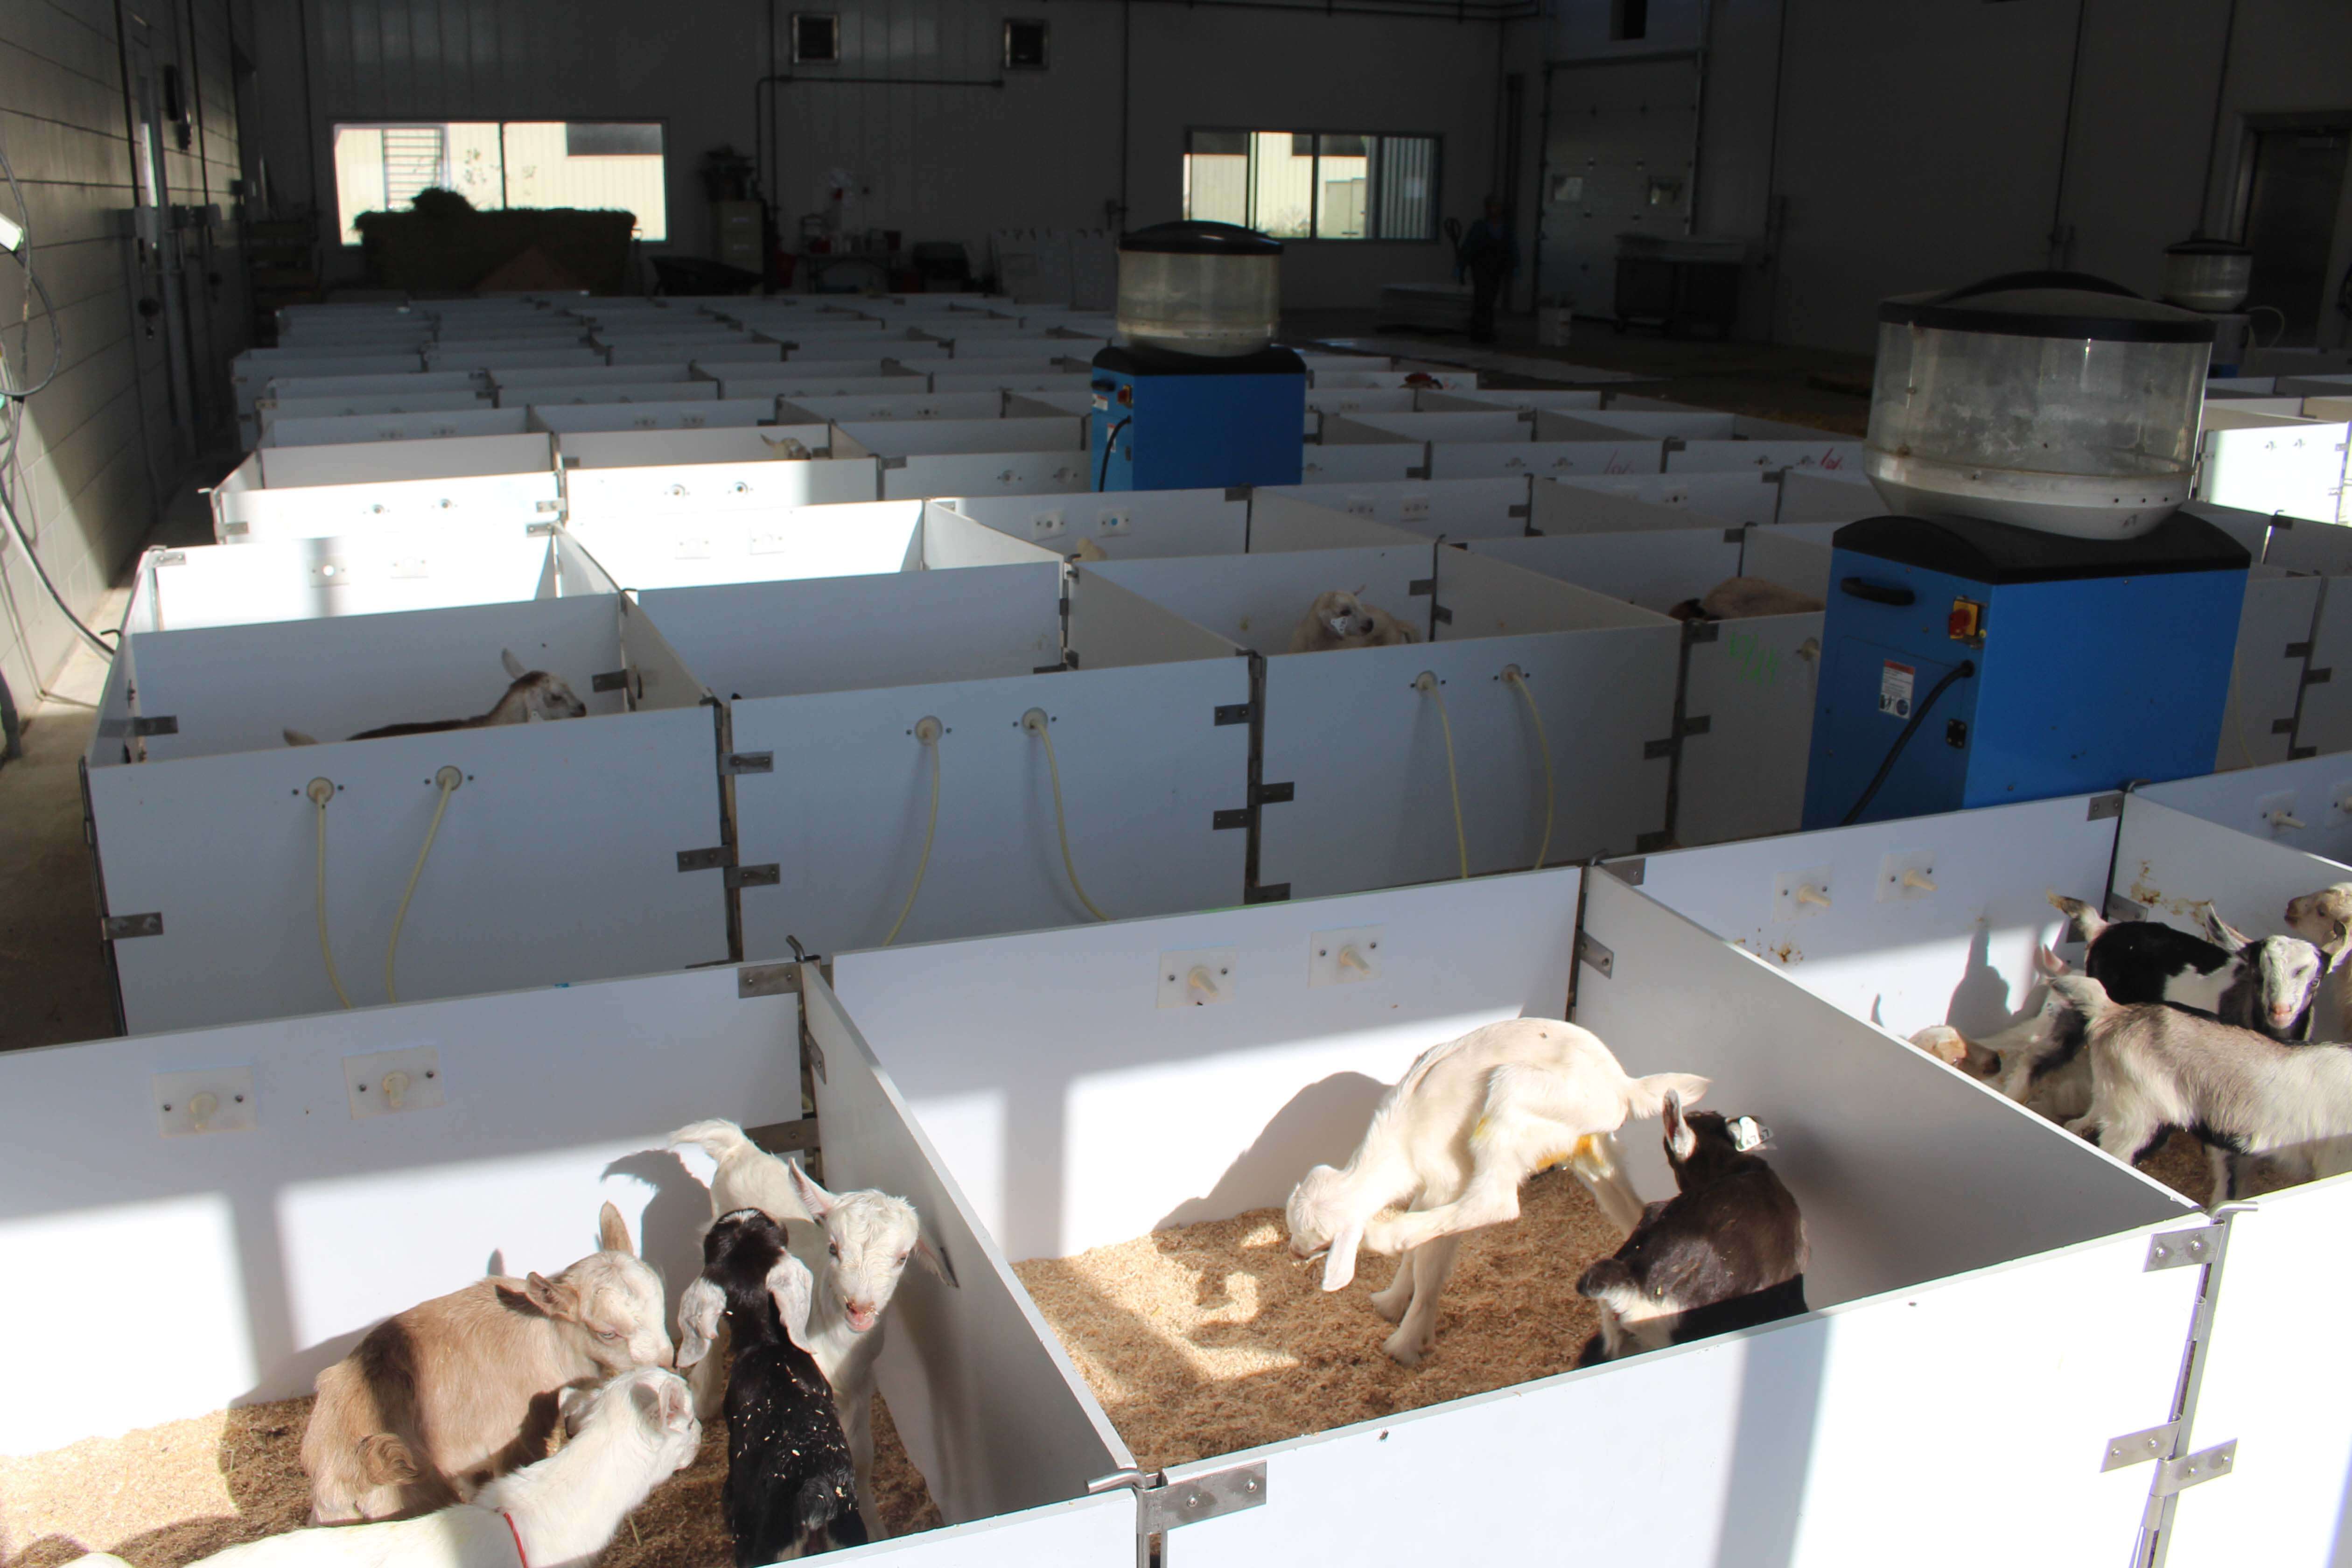 After processing, newborn kids are placed in groups of five in these training pens. They are first fed milk replacer via nipple bottle until they are trained to drink from the autofeeder nipples. They move from these pens at six days of age.